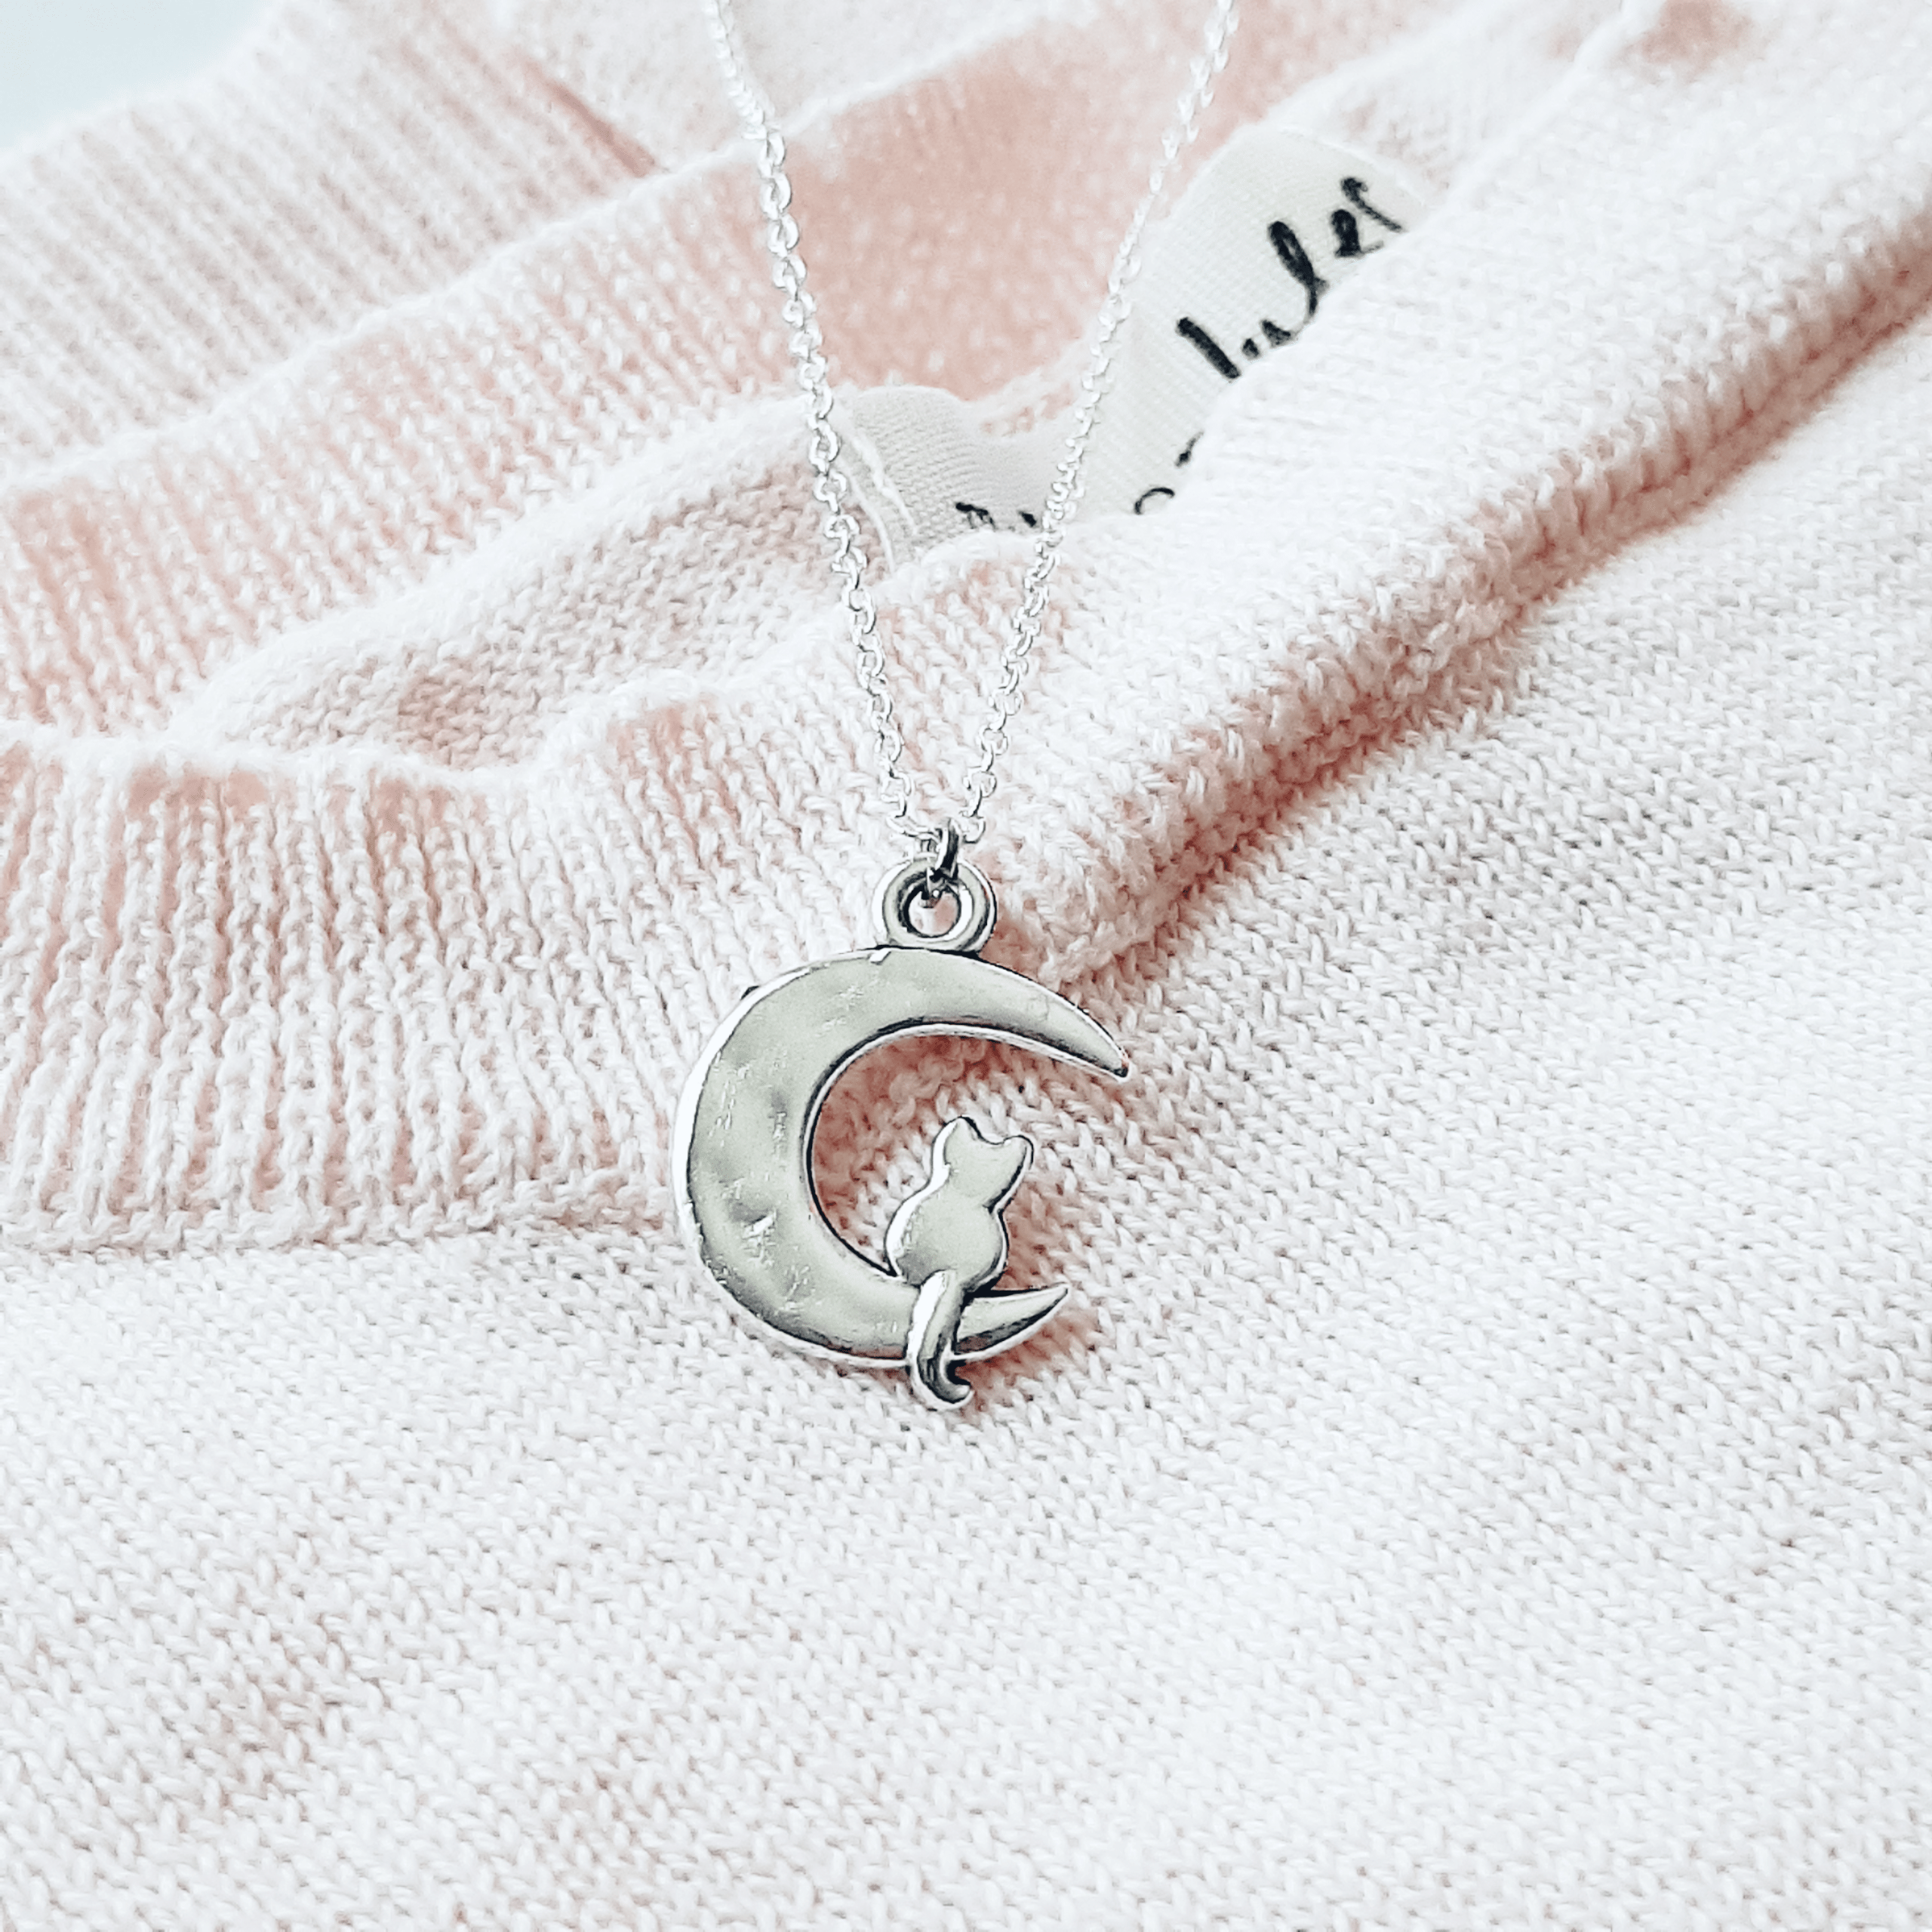 Shop Silver Kitty Cat on The Moon Pendant Necklace for Cat Lovers | Gift for Birthday, Christmas, Mother's Day, Anniversary and Valentine's Day, Necklaces, USA Boutique